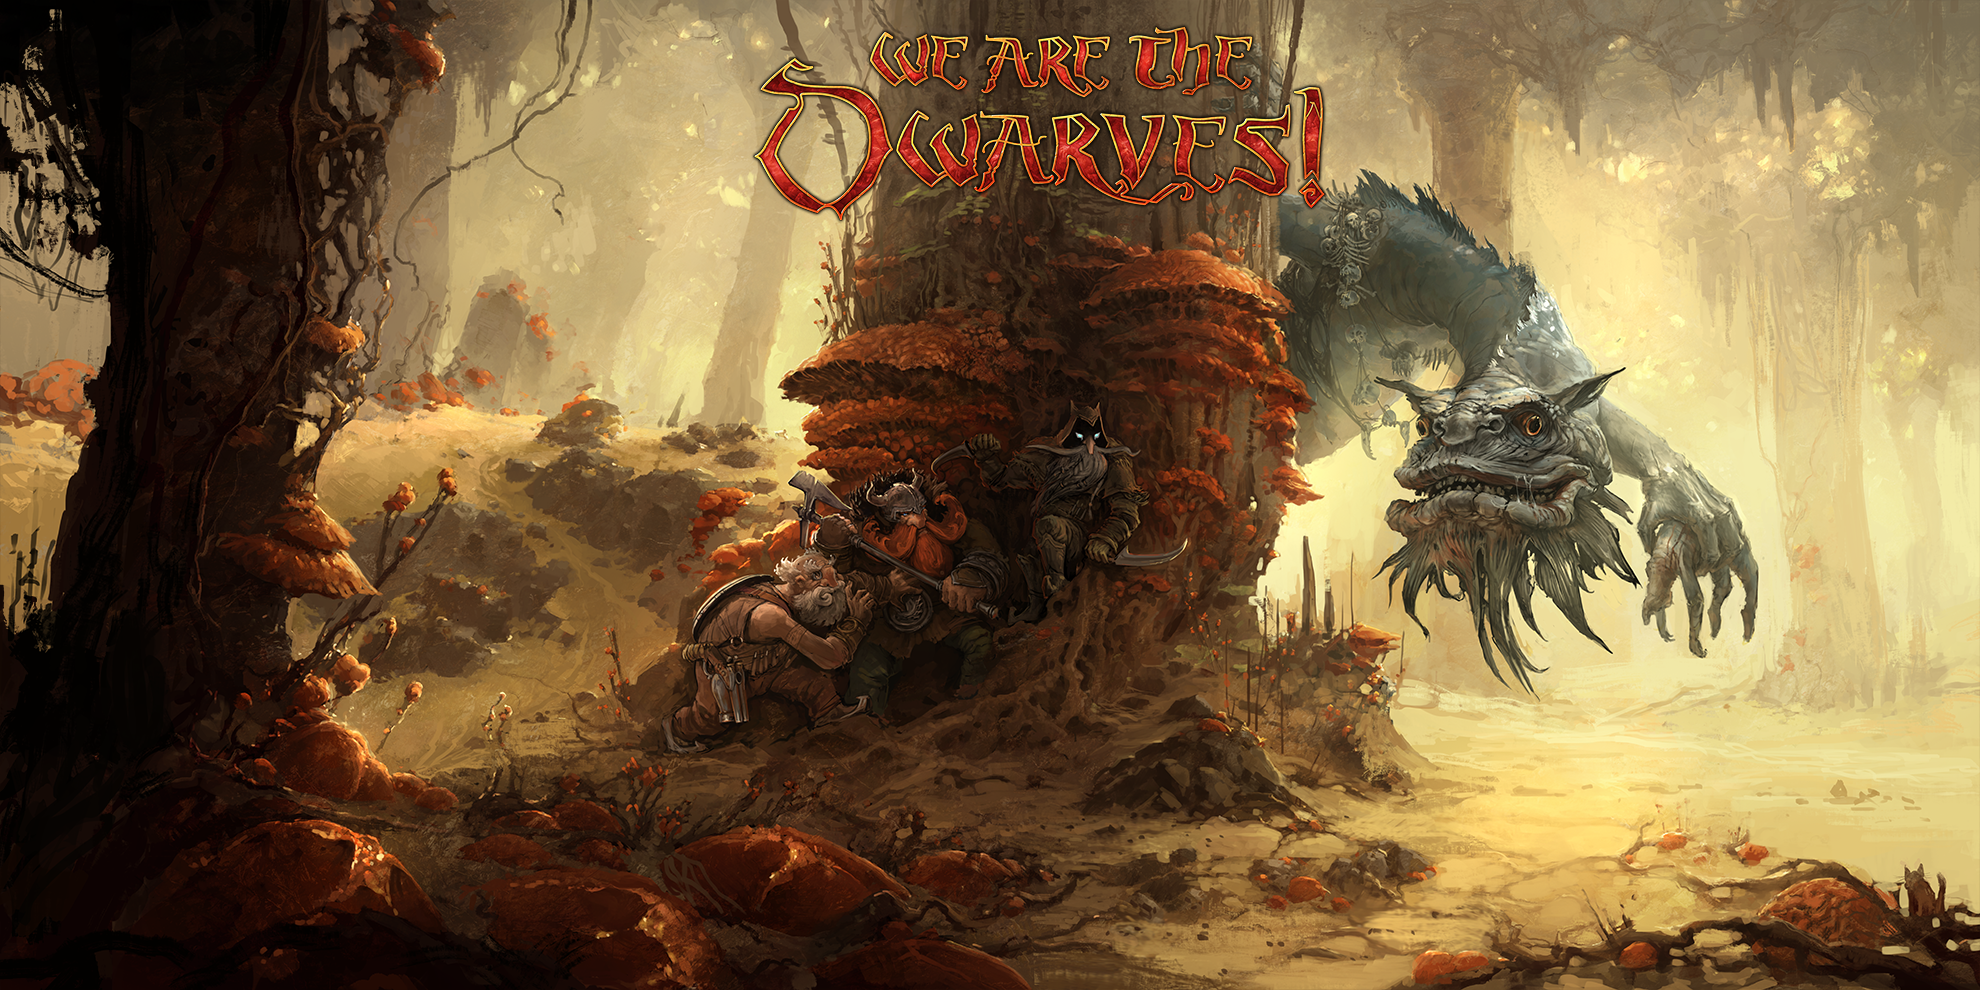 We Are the Dwarves! Preview  2